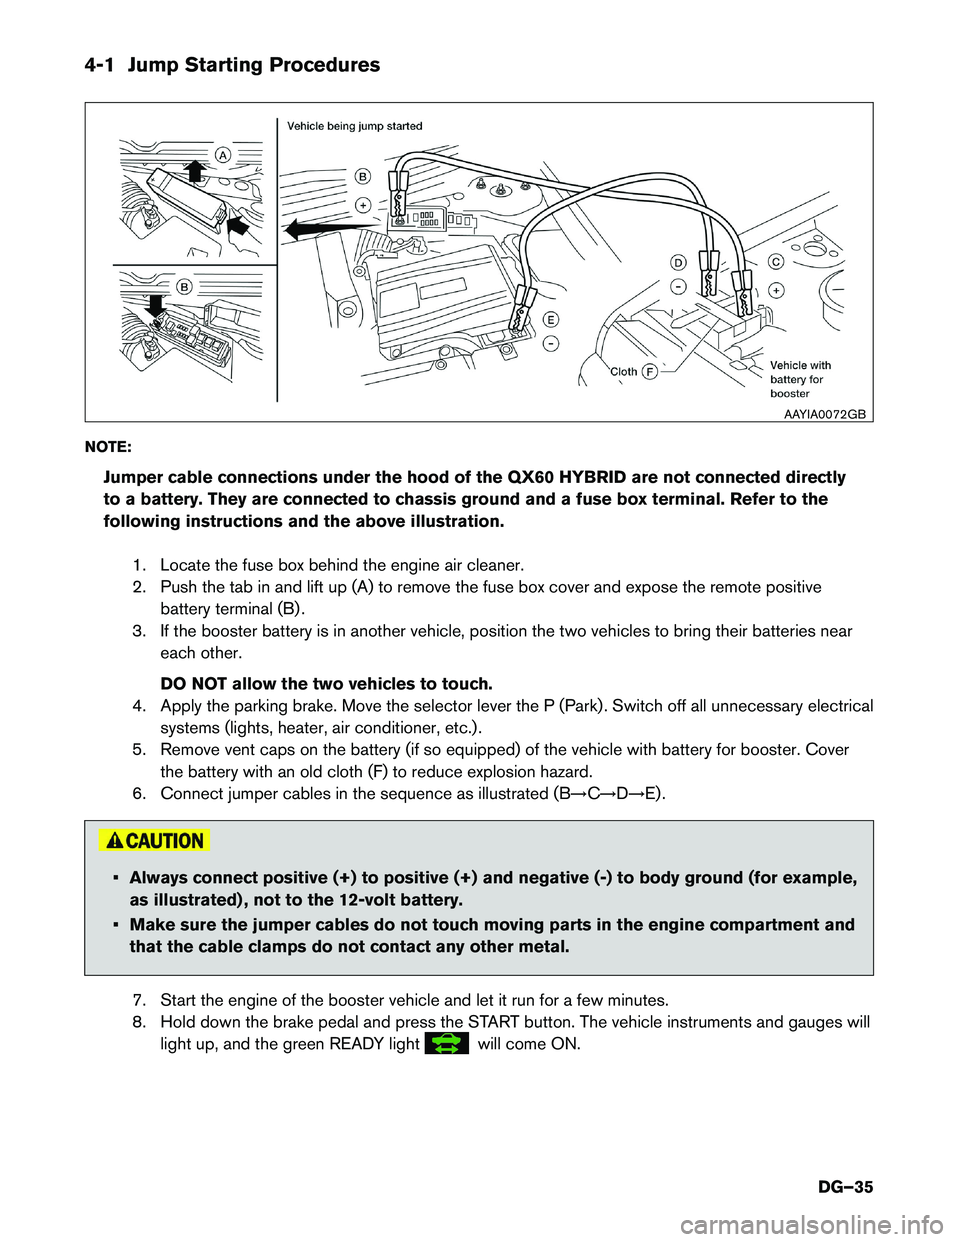 INFINITI QX60 HYBRID 2017  Dismantling Guide 4-1 Jump Starting Procedures
NO
TE:
Jumper cable connections under the hood of the QX60 HYBRID are not connected directly
to a battery. They are connected to chassis ground and a fuse box terminal. Re